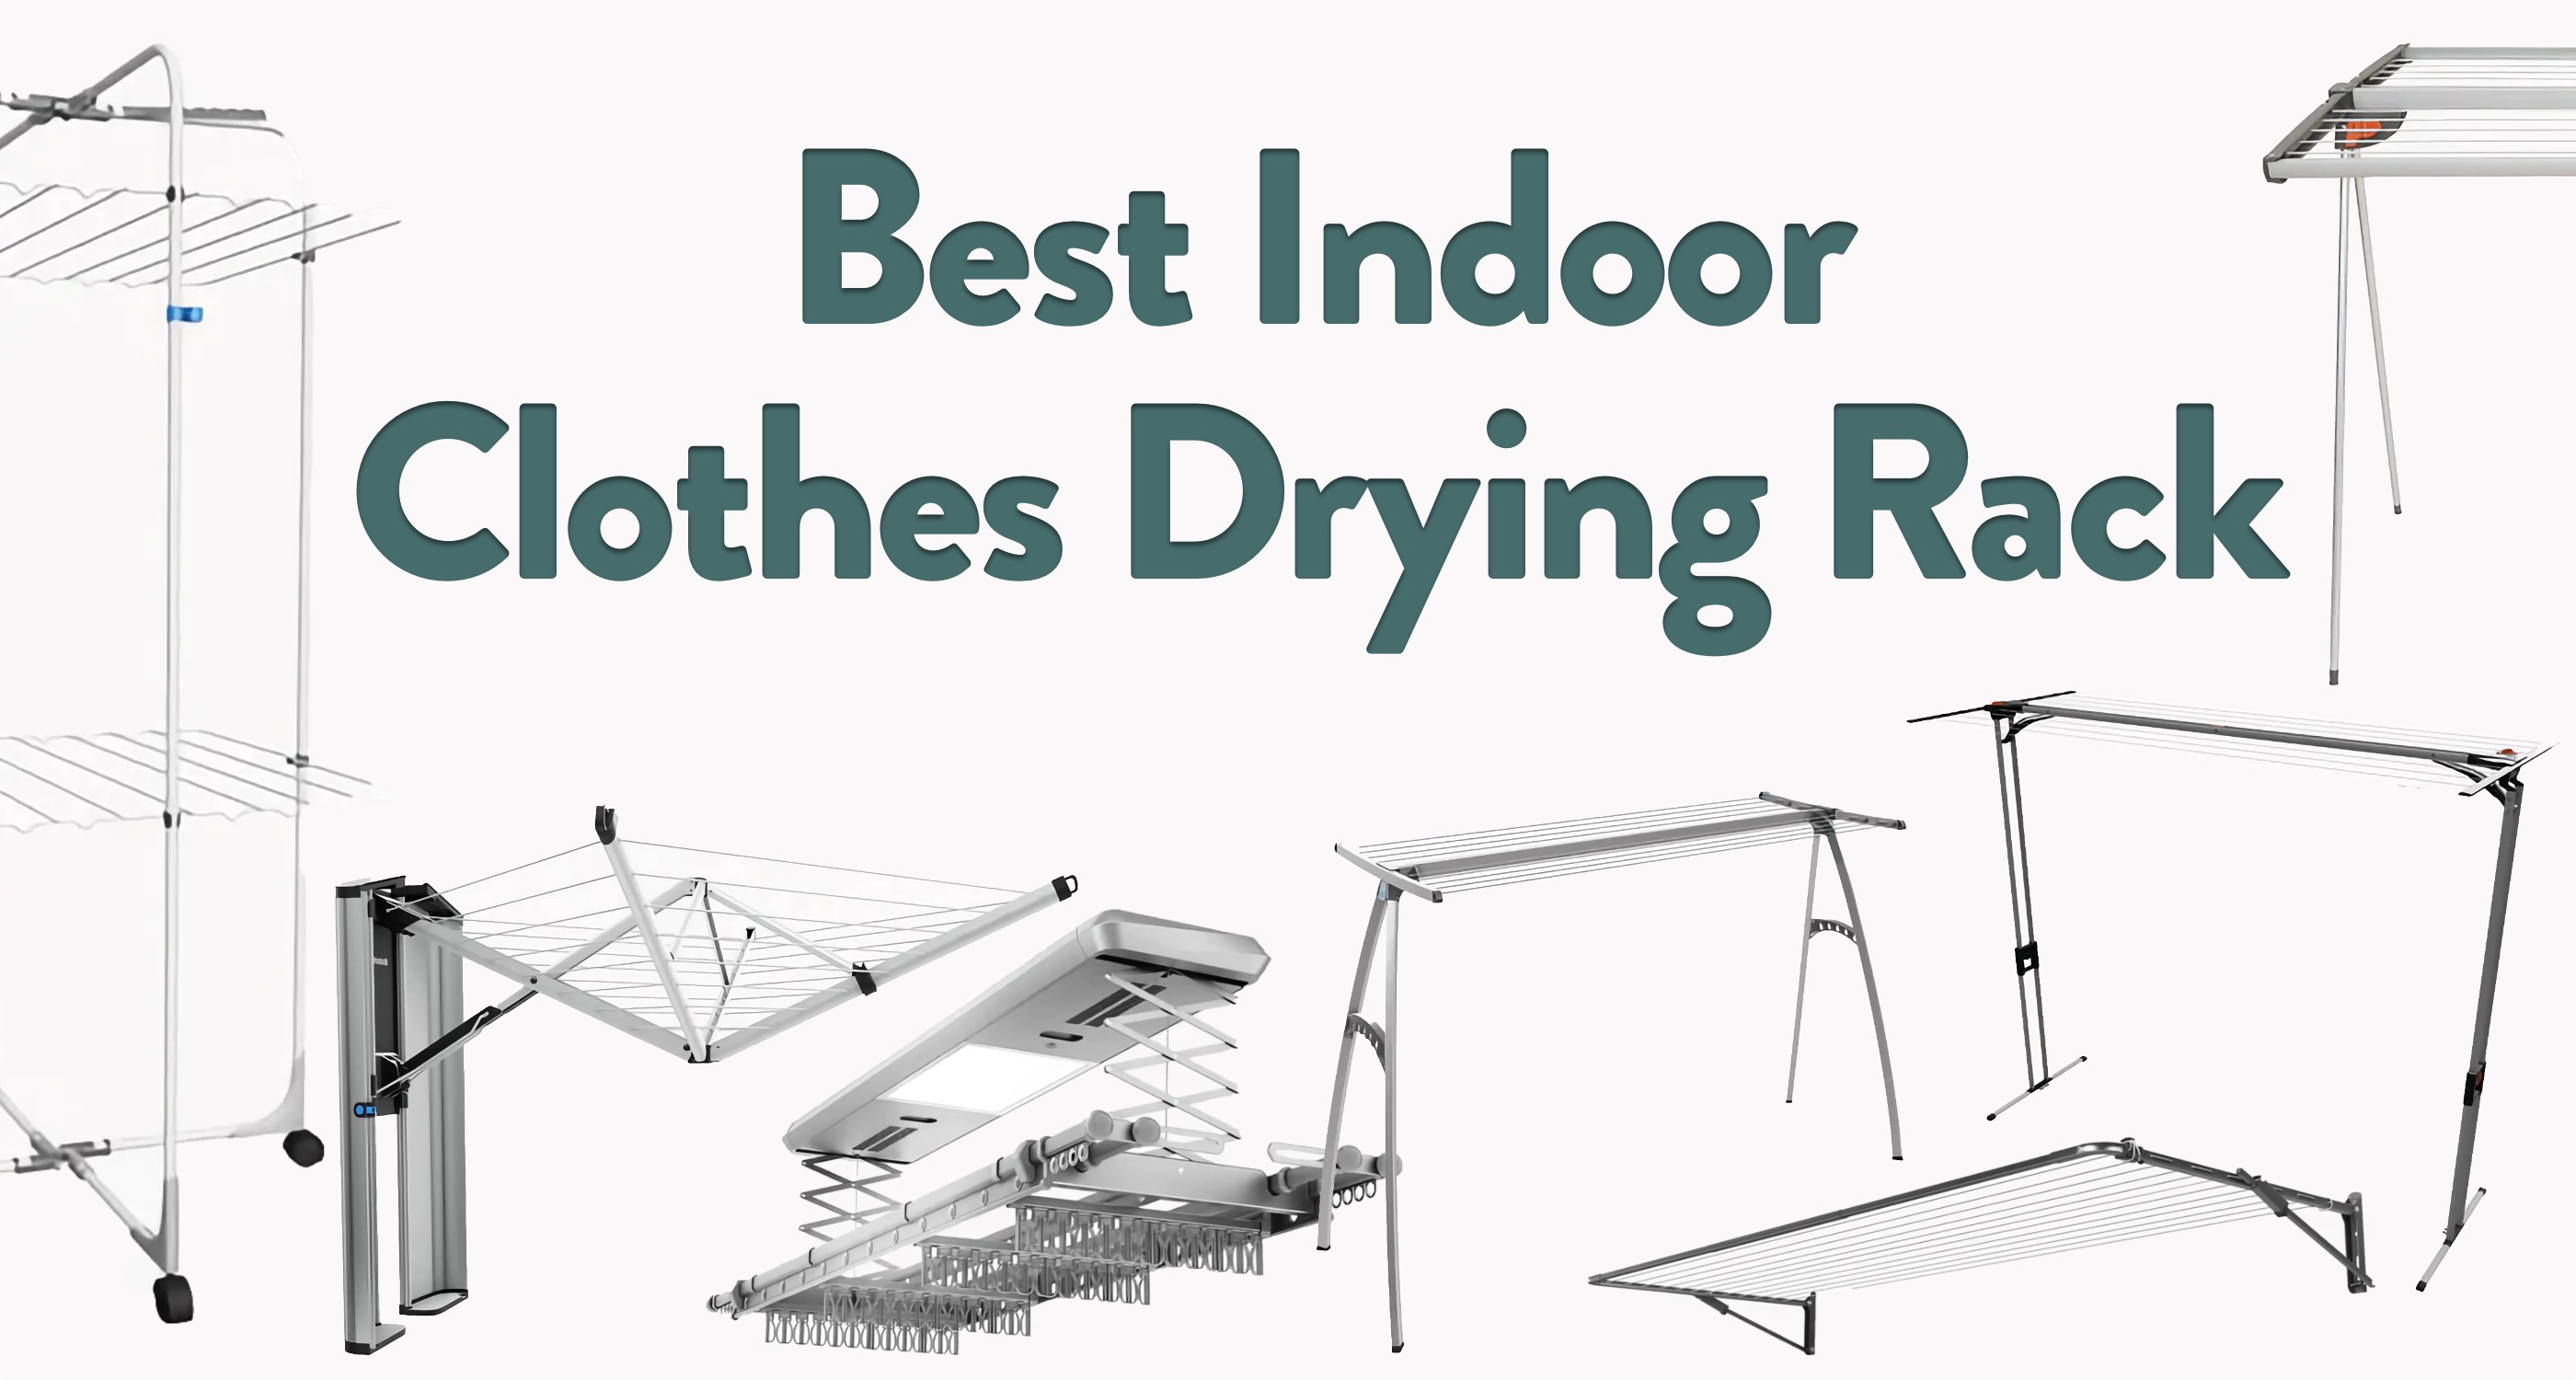 Best Indoor Clothes Drying Rack – Lifestyle Clotheslines